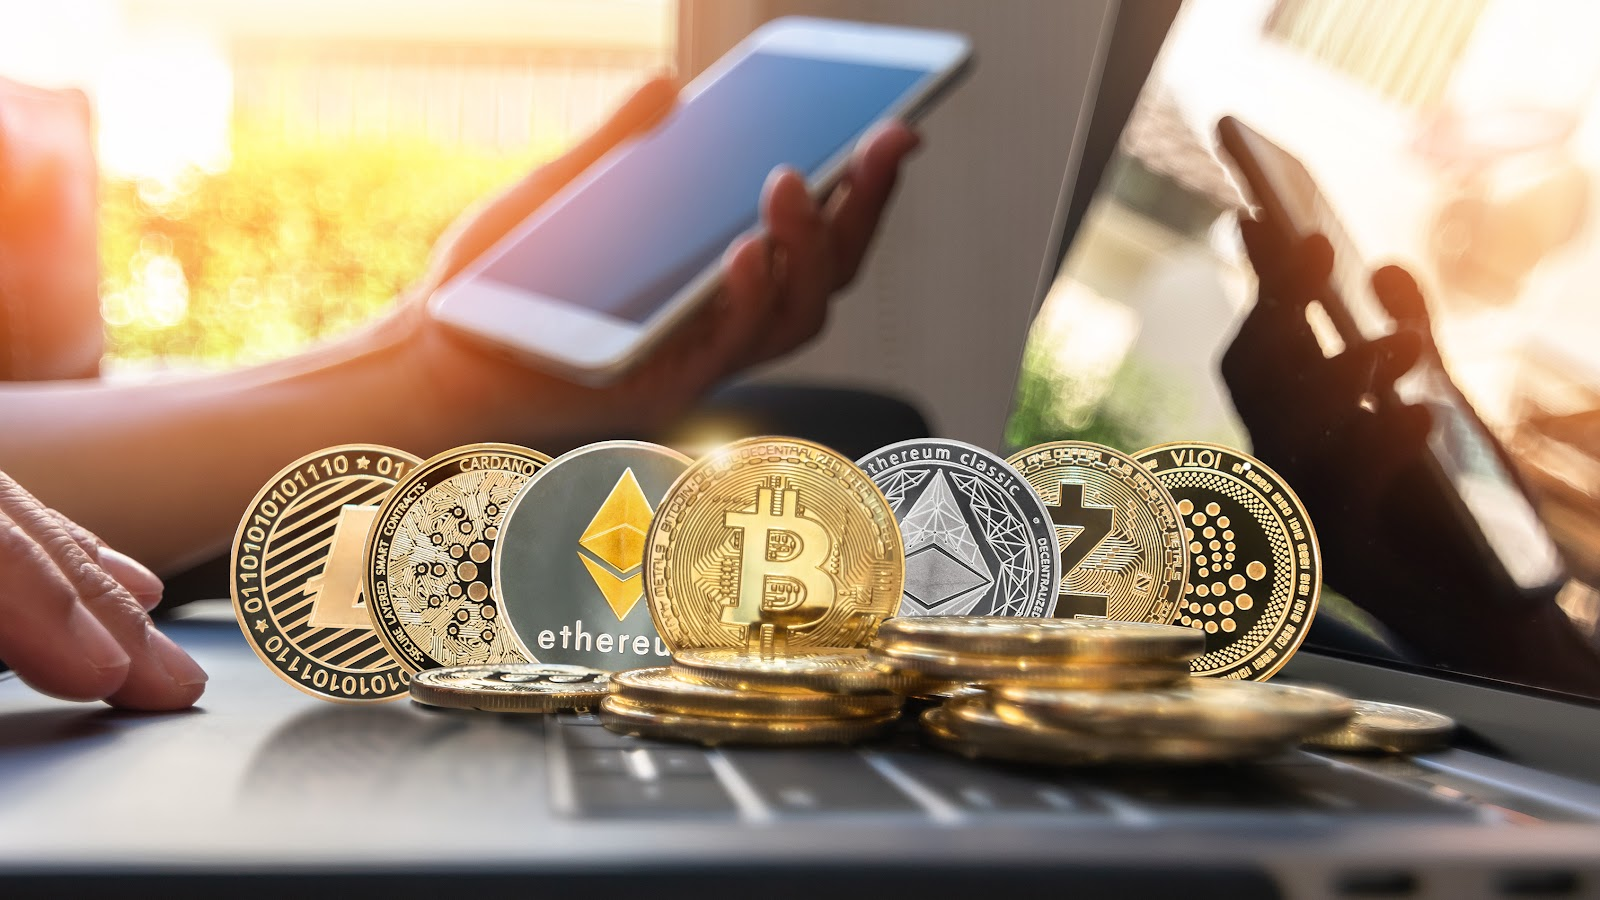 Top 3 Penny Cryptocurrencies That Could Be Worth $100 By Spring